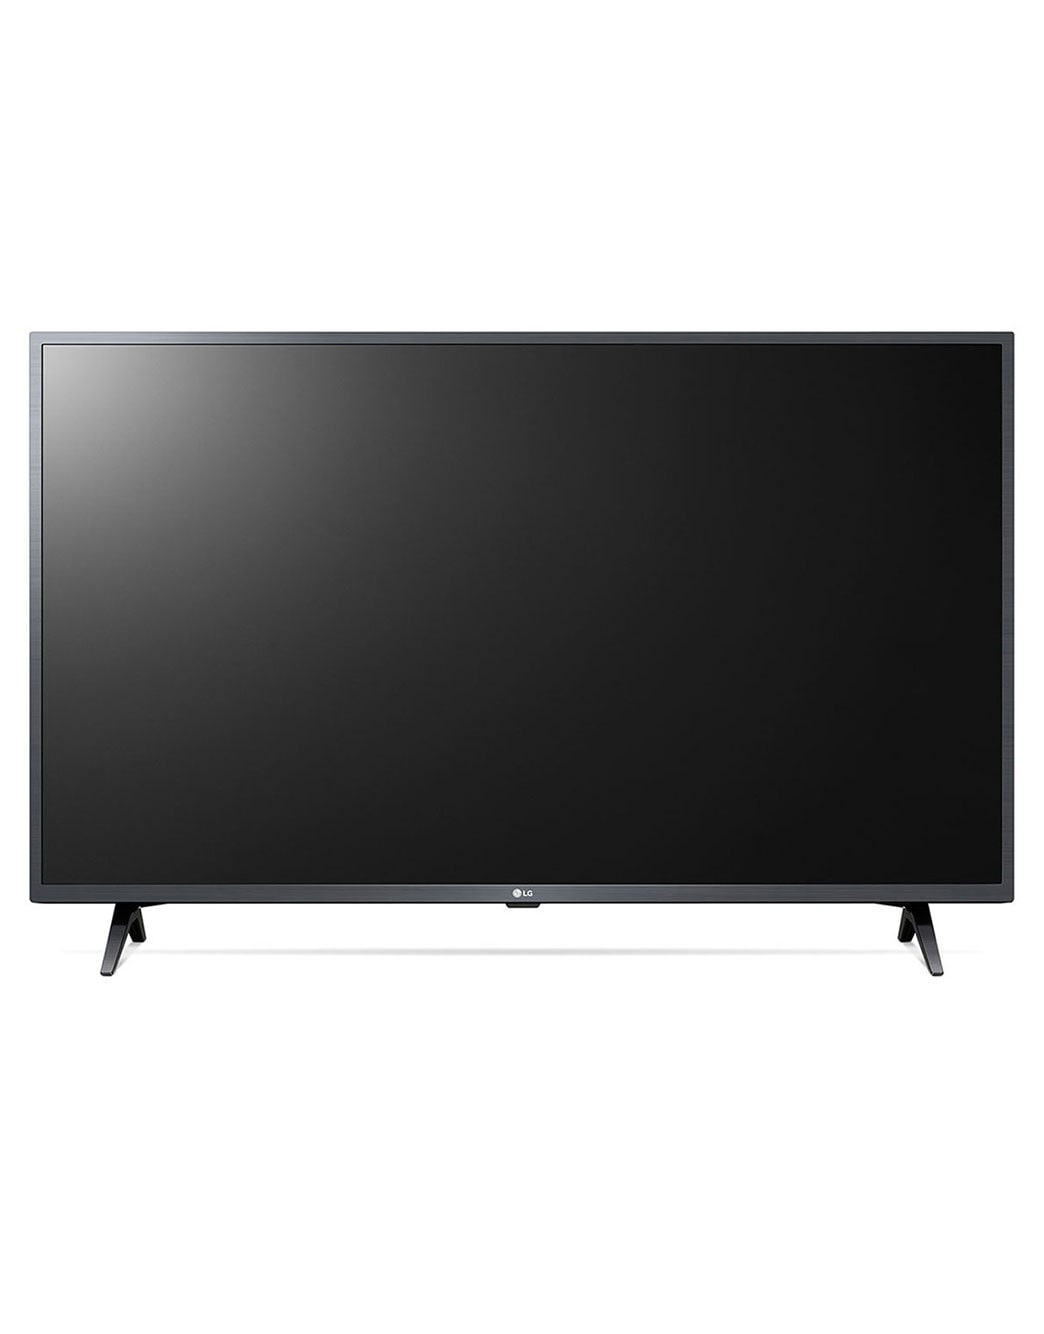 Enhance Your Home Entertainment with 43-inch Smart LED TV: LM6370 Series  with Full HDR